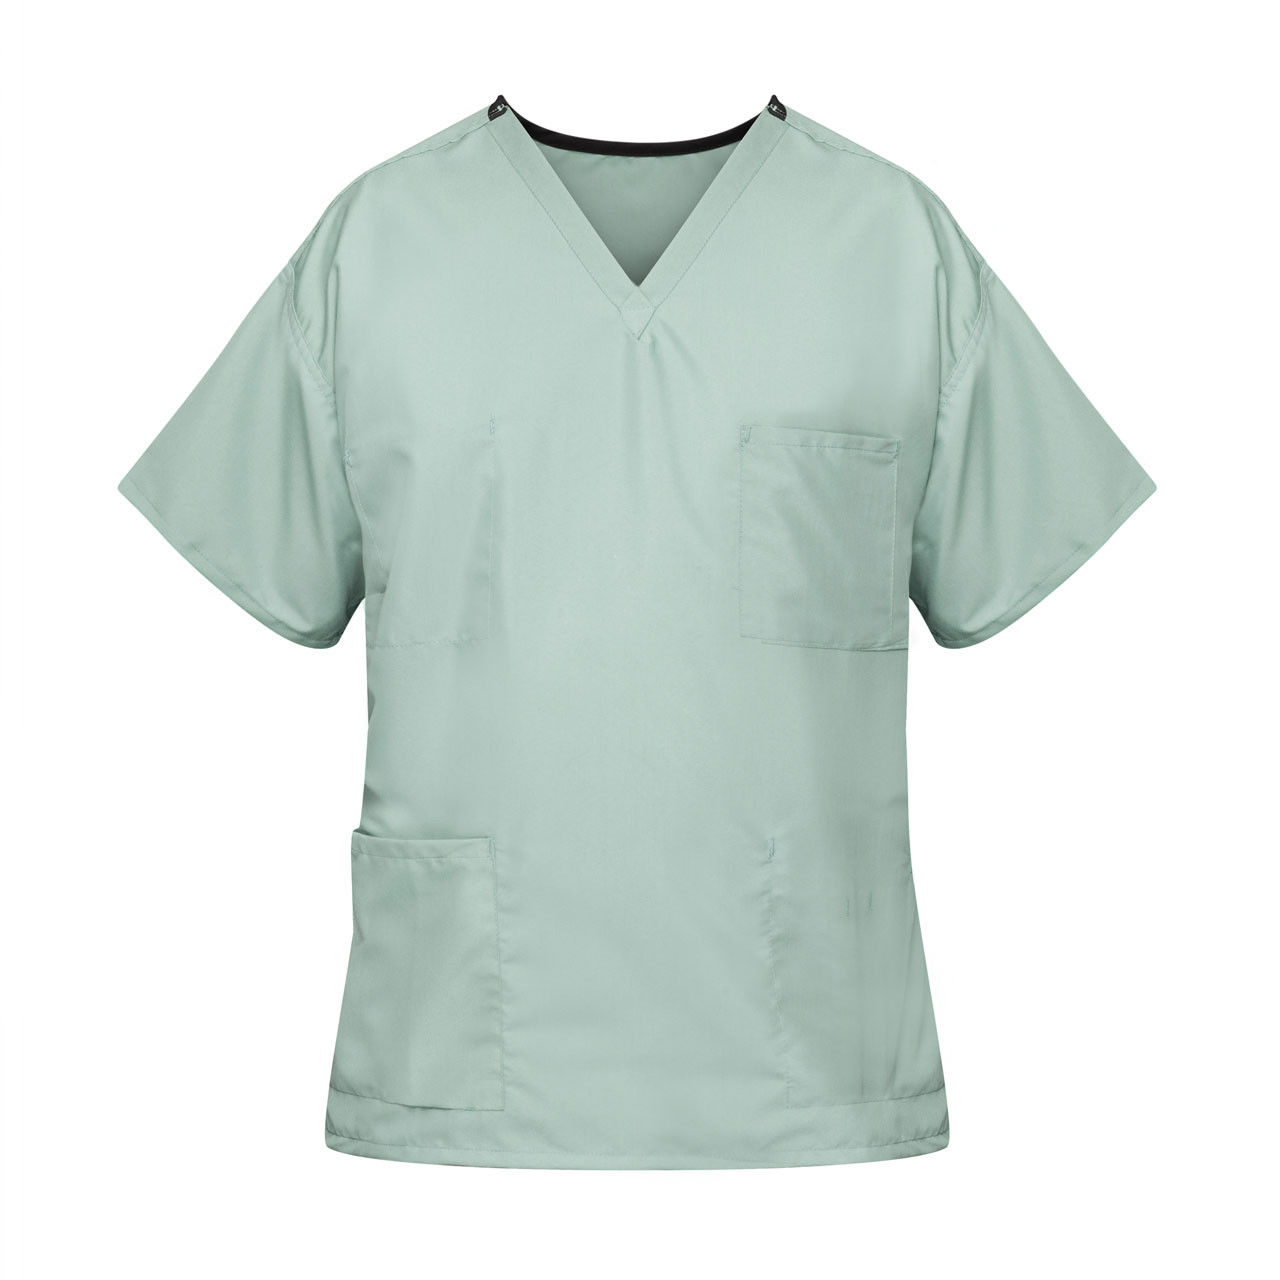 Where is the lower front pocket on the Misty Green Scrub Top?